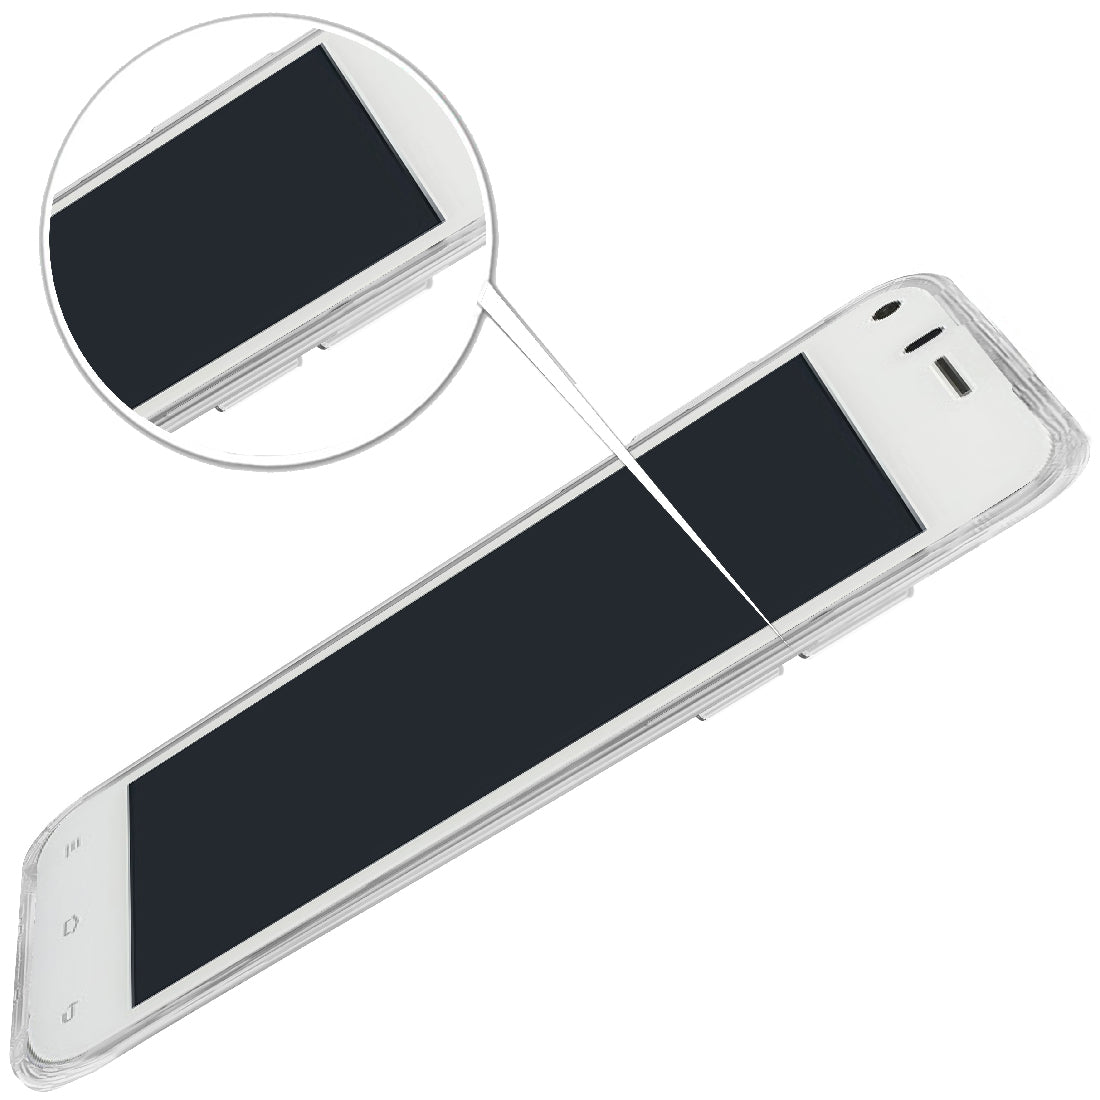 Clear Case for Gionee Pioneer P3